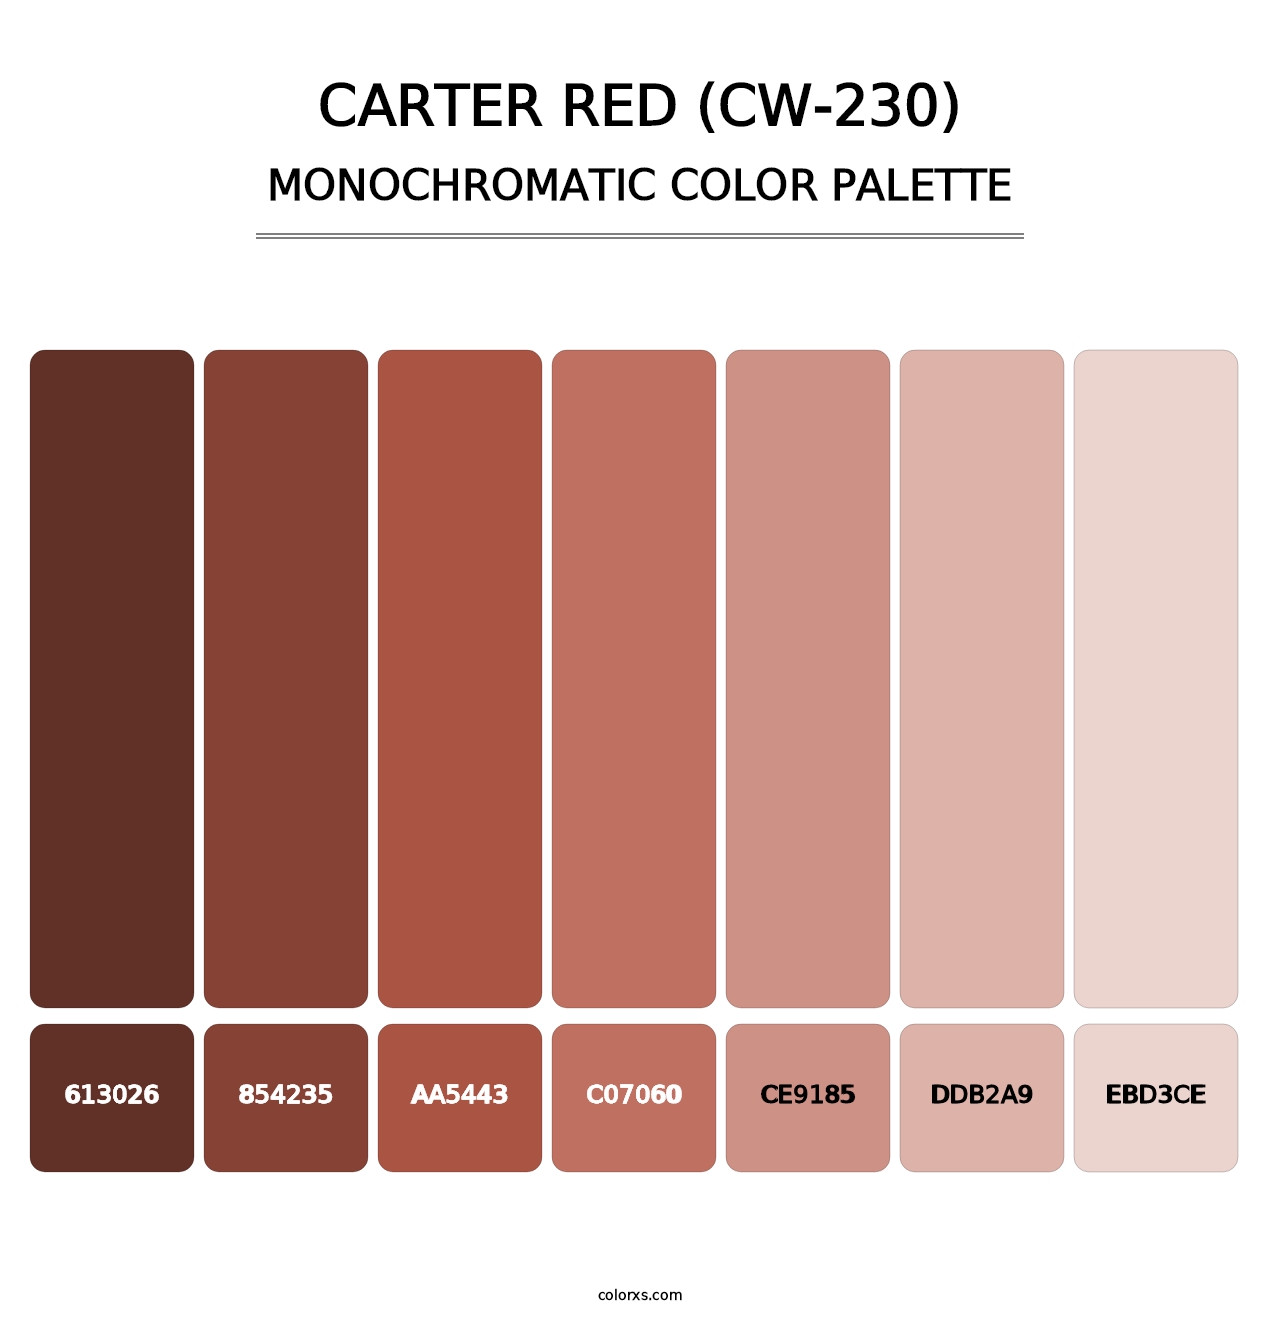 Carter Red (CW-230) - Monochromatic Color Palette